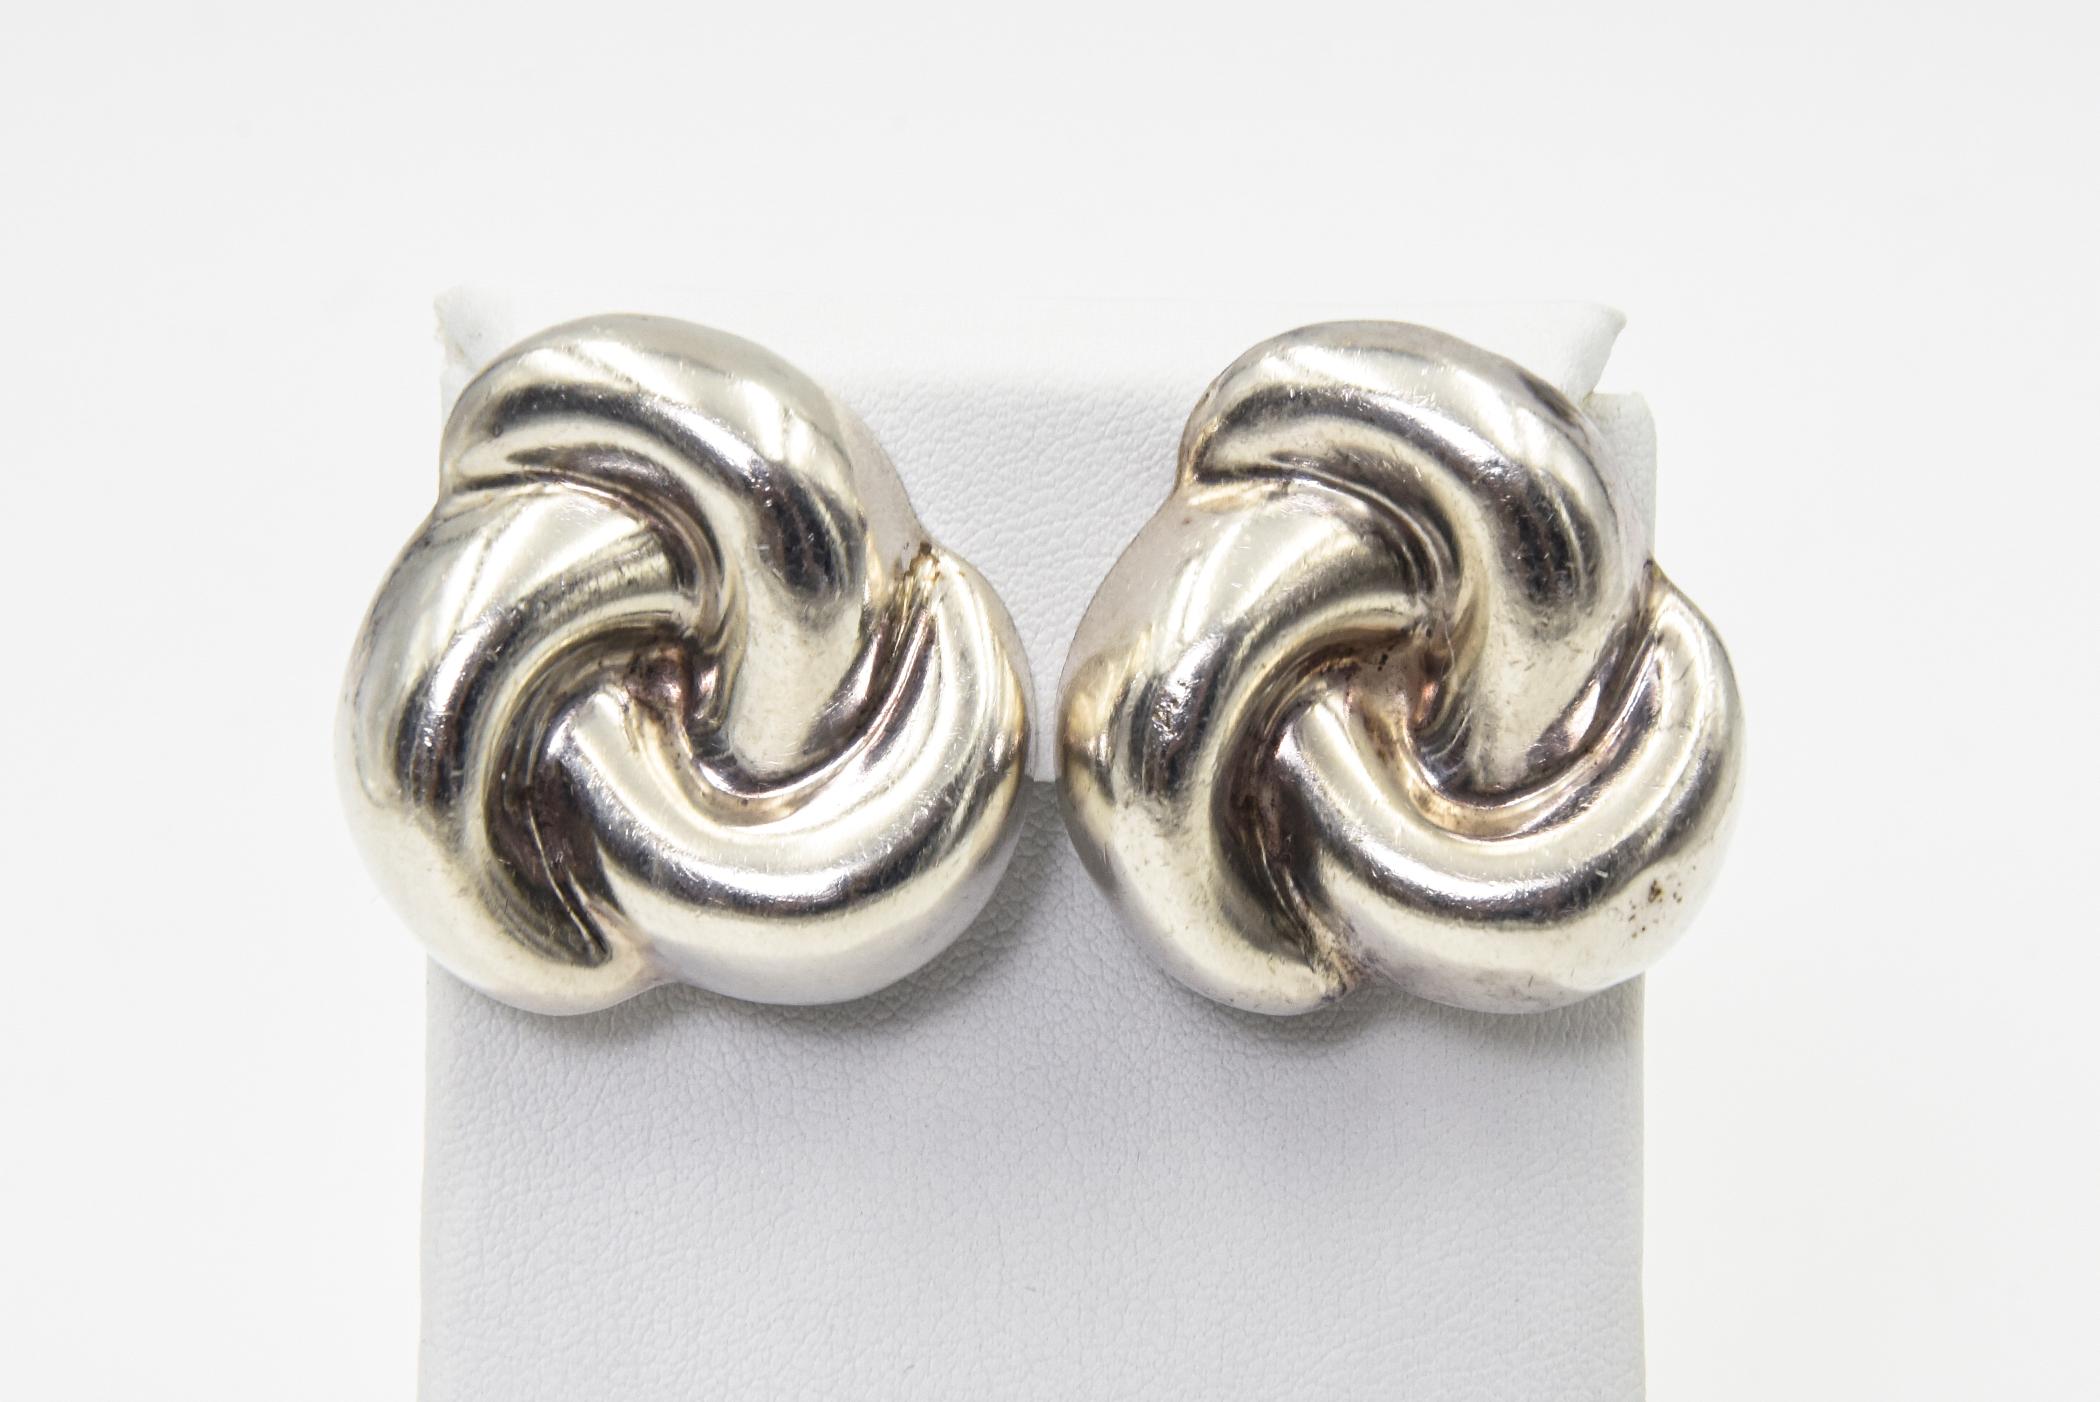 Pair of vintage Mexico Mexican knot design clip on earrings marked 925 Mexico Nestor TJ24.